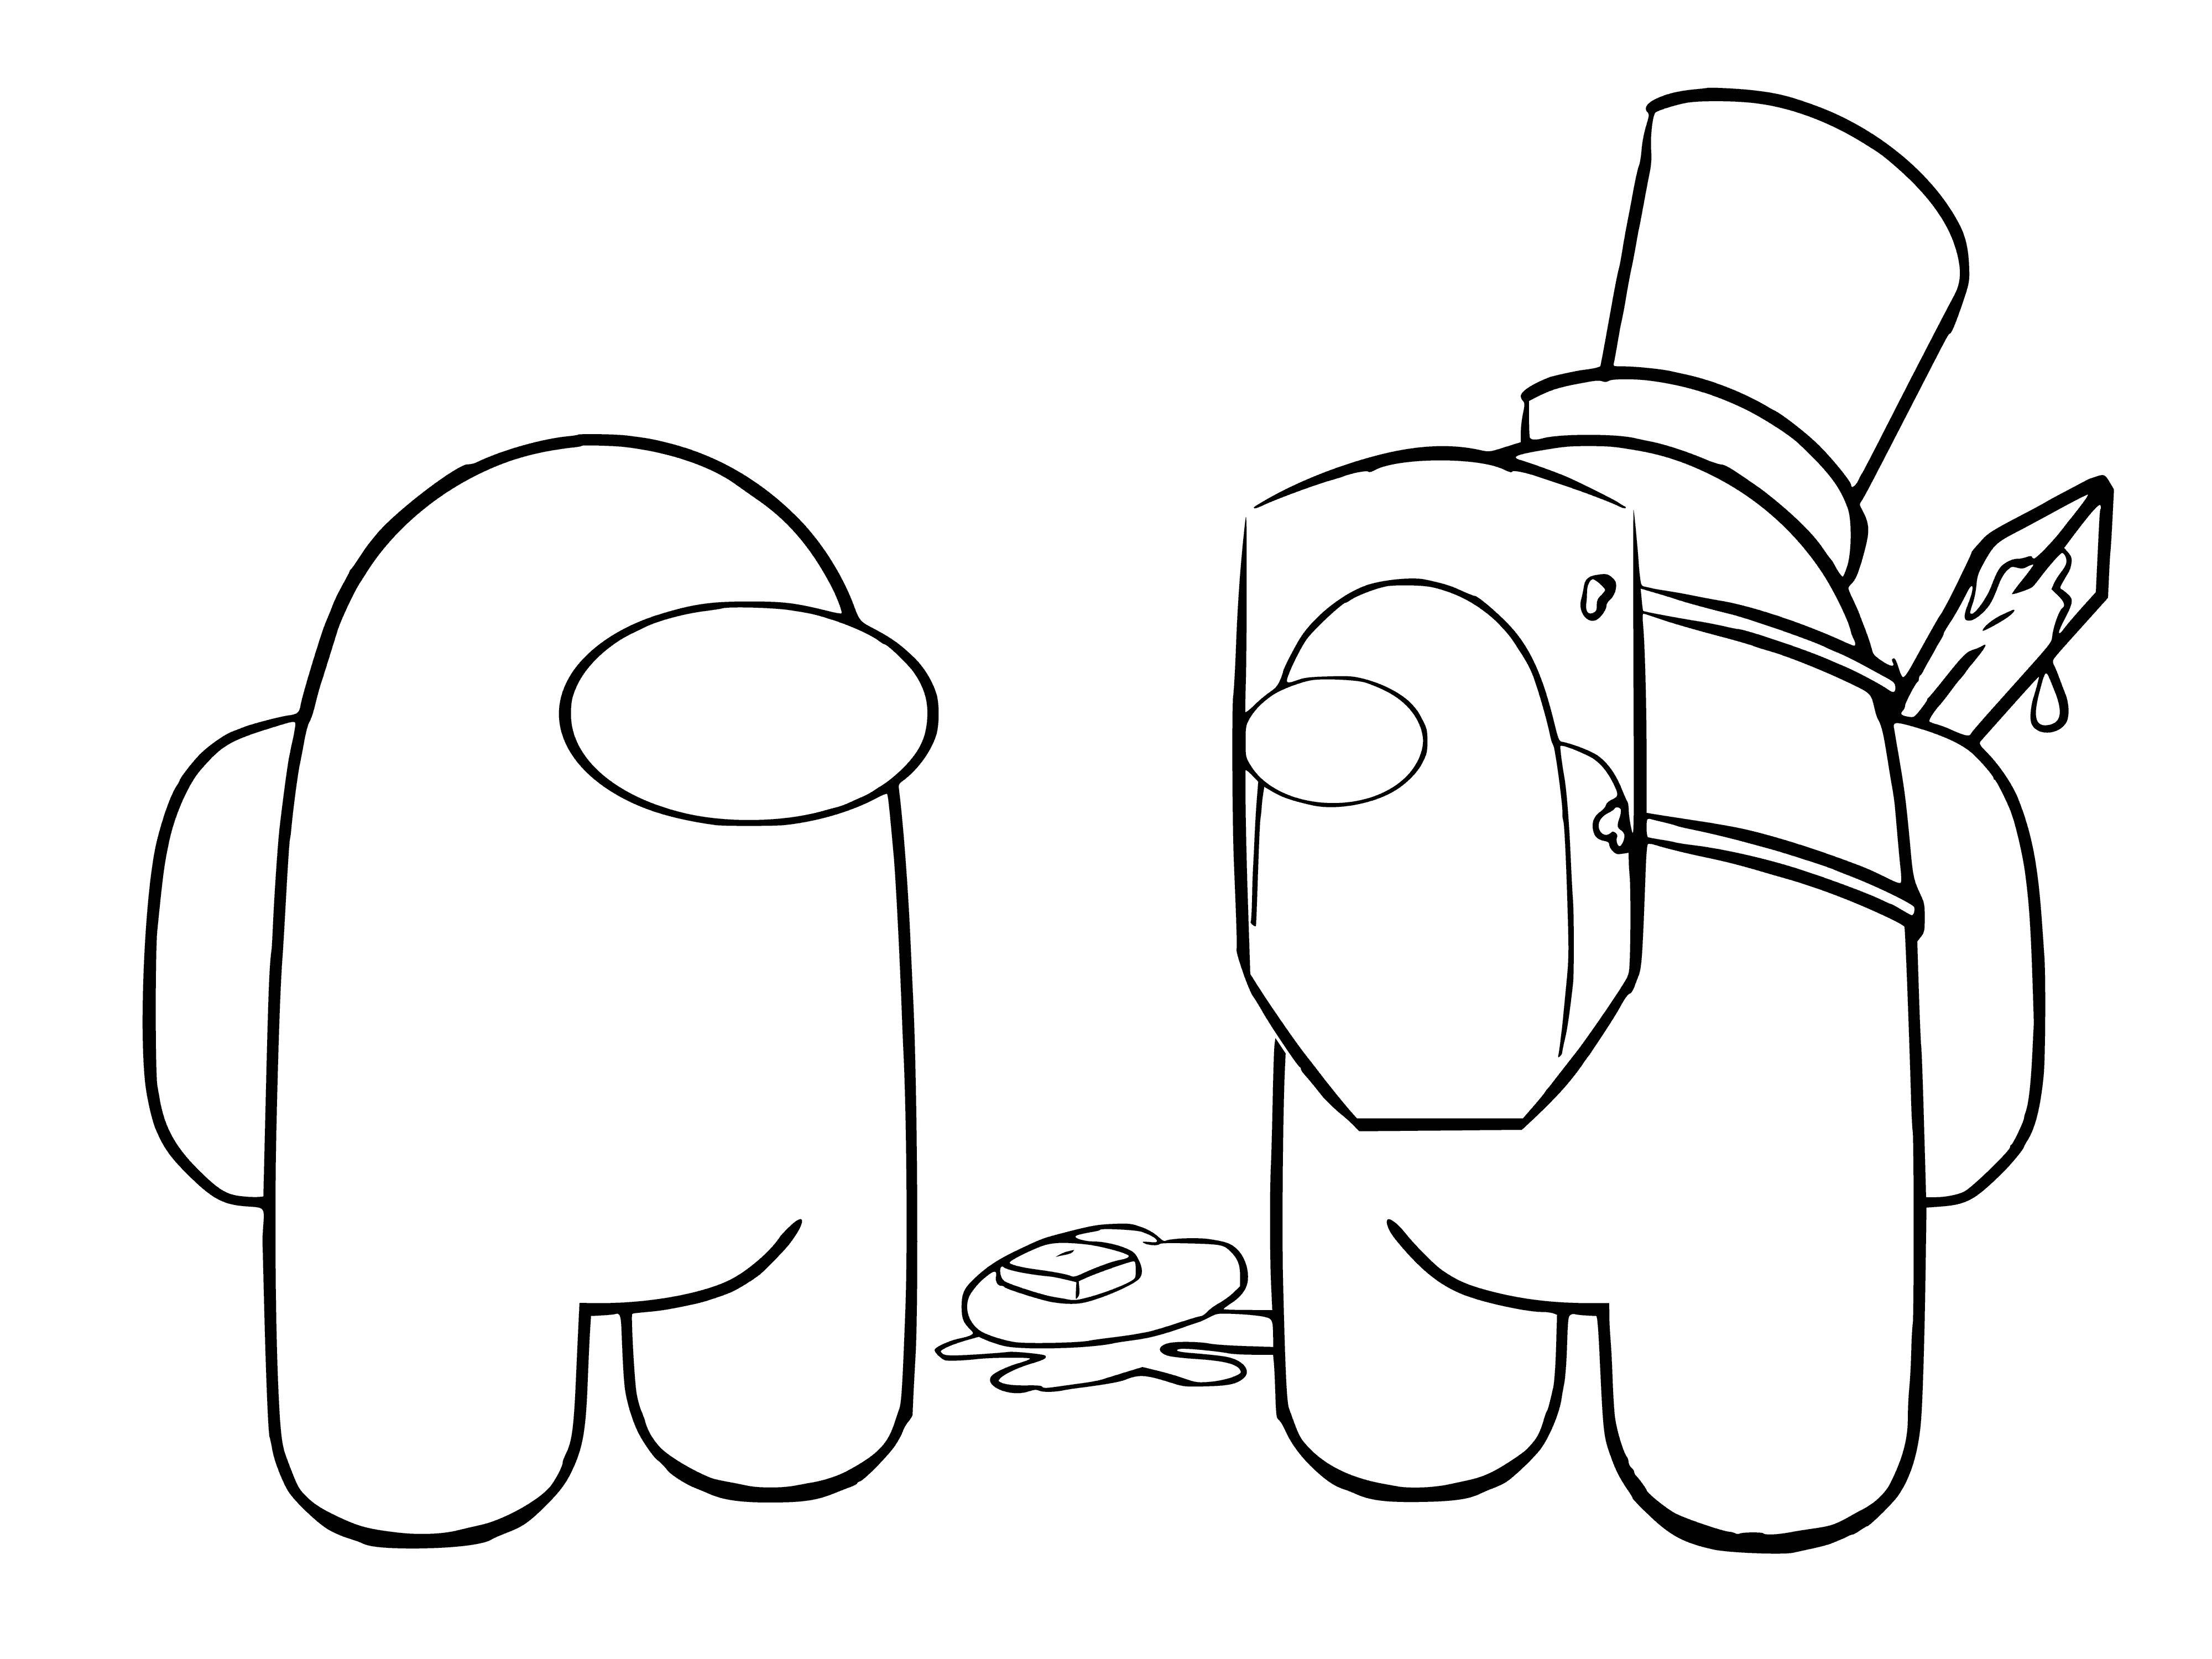 coloring page: 3 spacecrafts in space at night; 1 large, 2 small. Creatures in cockpits have 2/1 eyes, respectively.